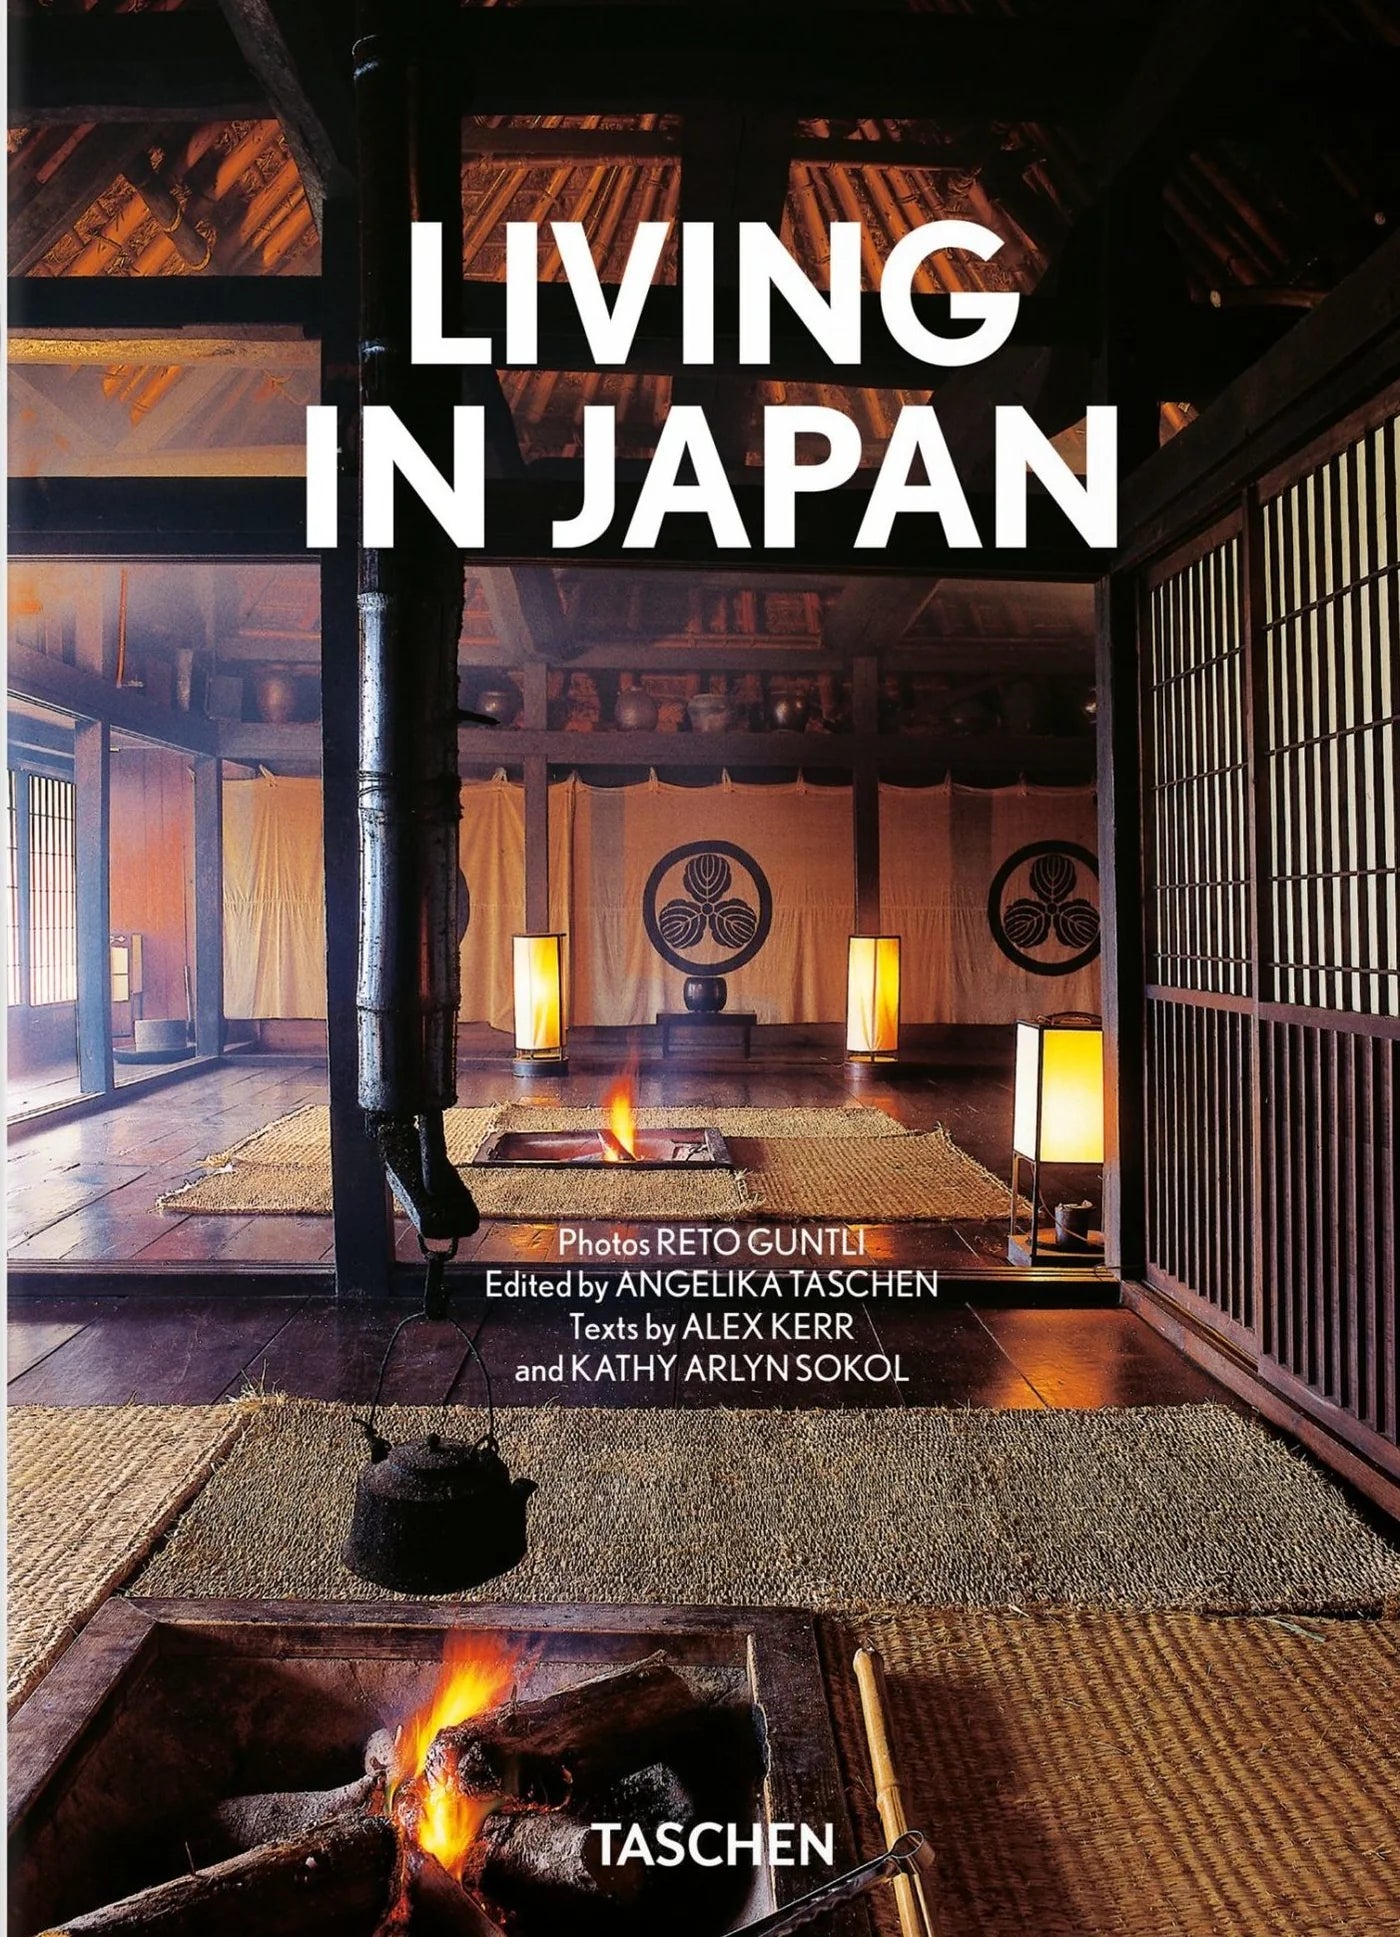 Coffee table book - Living in Japan